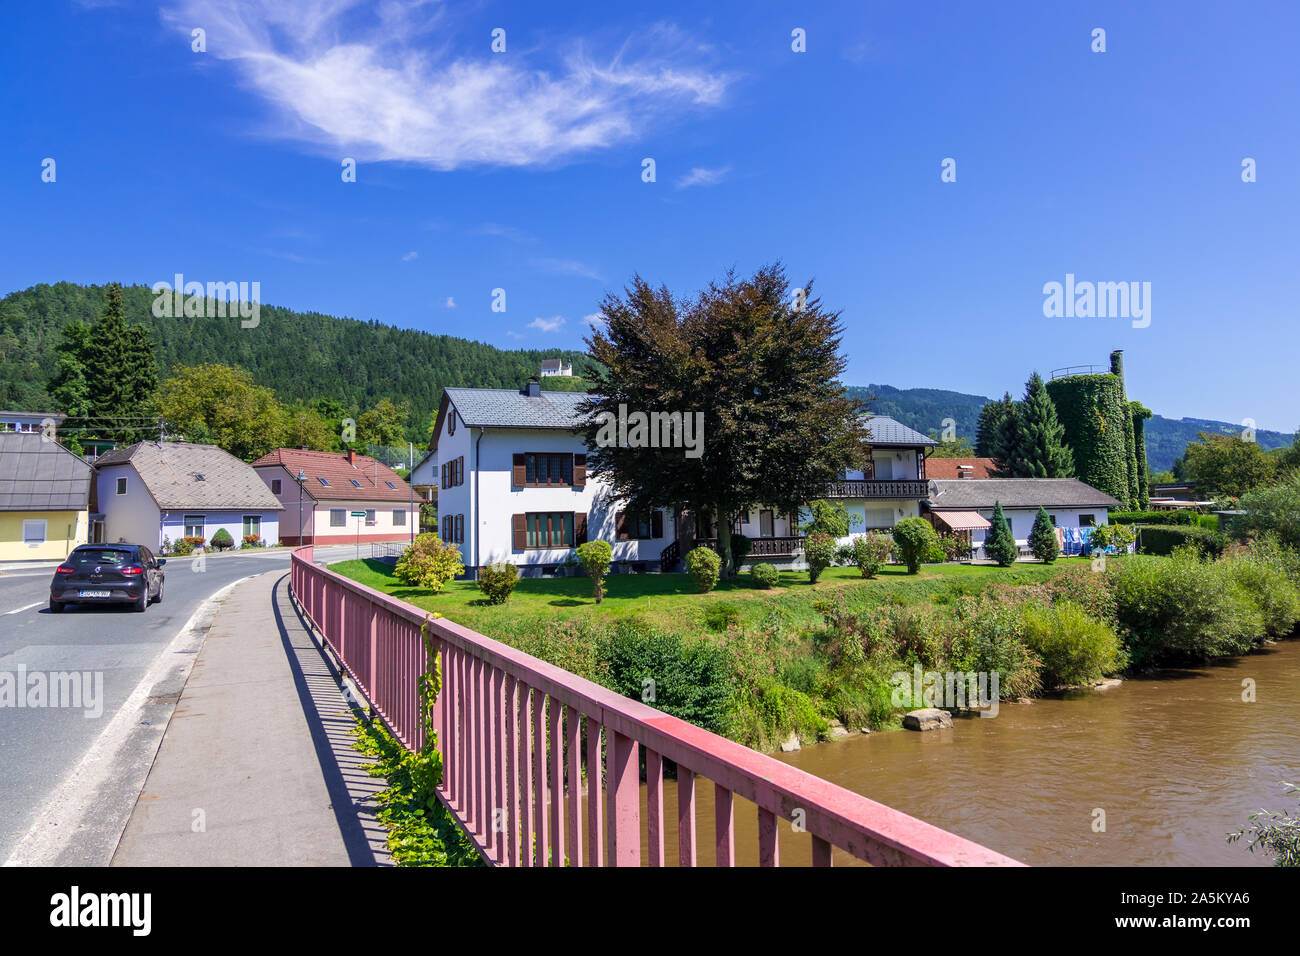 Lavamund, Austria - August 09, 2019: Lavamund is a market town at the confluence of Lavant and Drava rivers. Wolfsberg, Austrian state of Carinthia Stock Photo